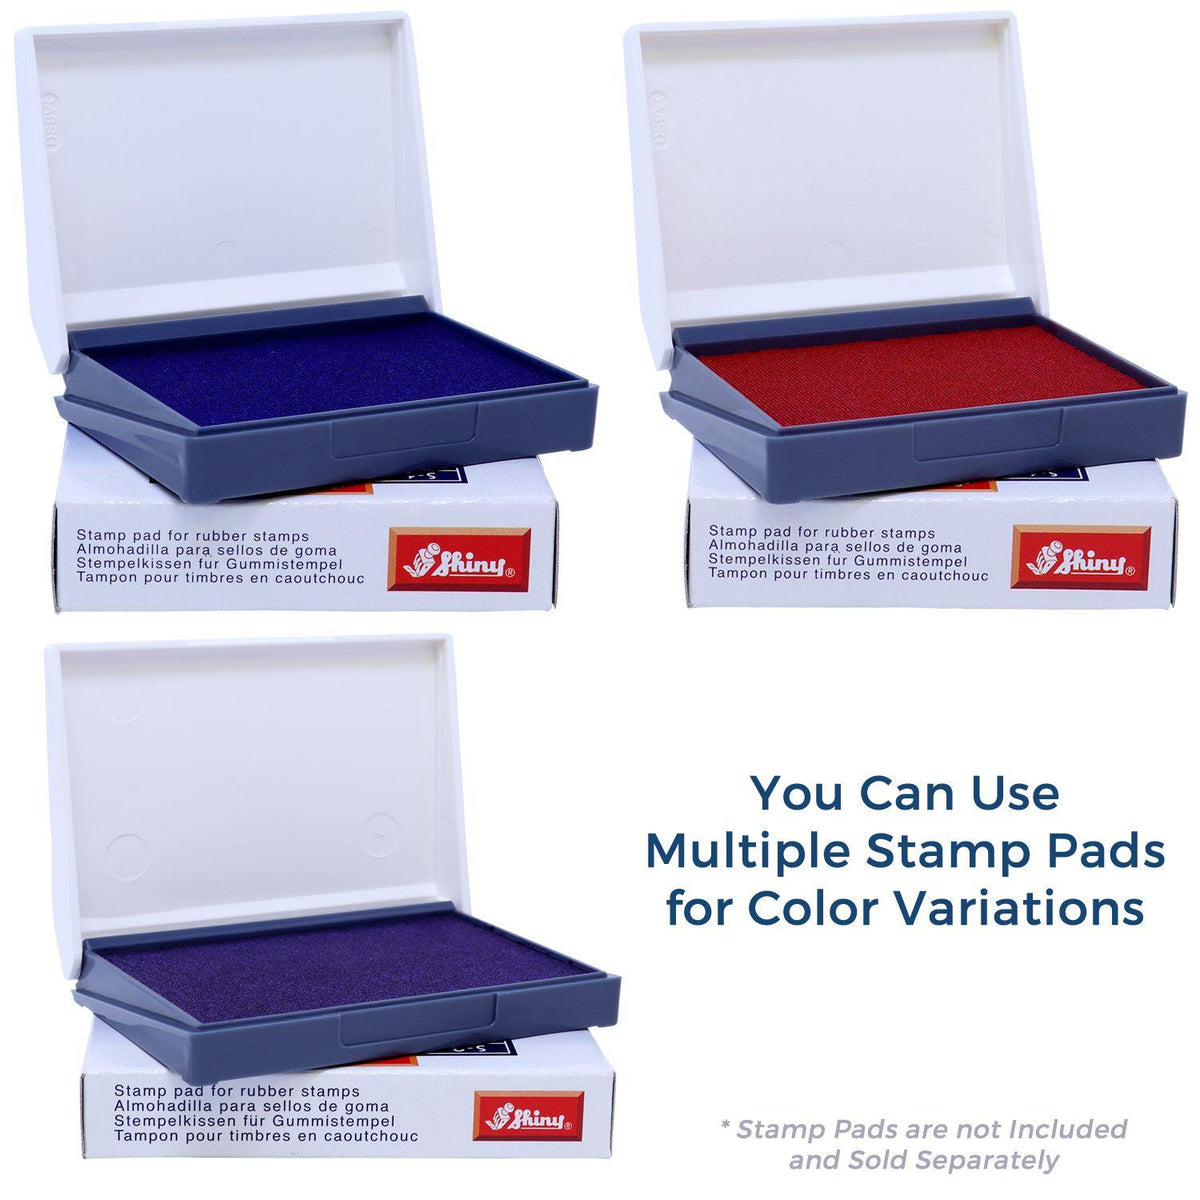 Stamp Pads for Large Expres Entrega Inmedia Rubber Stamp Available